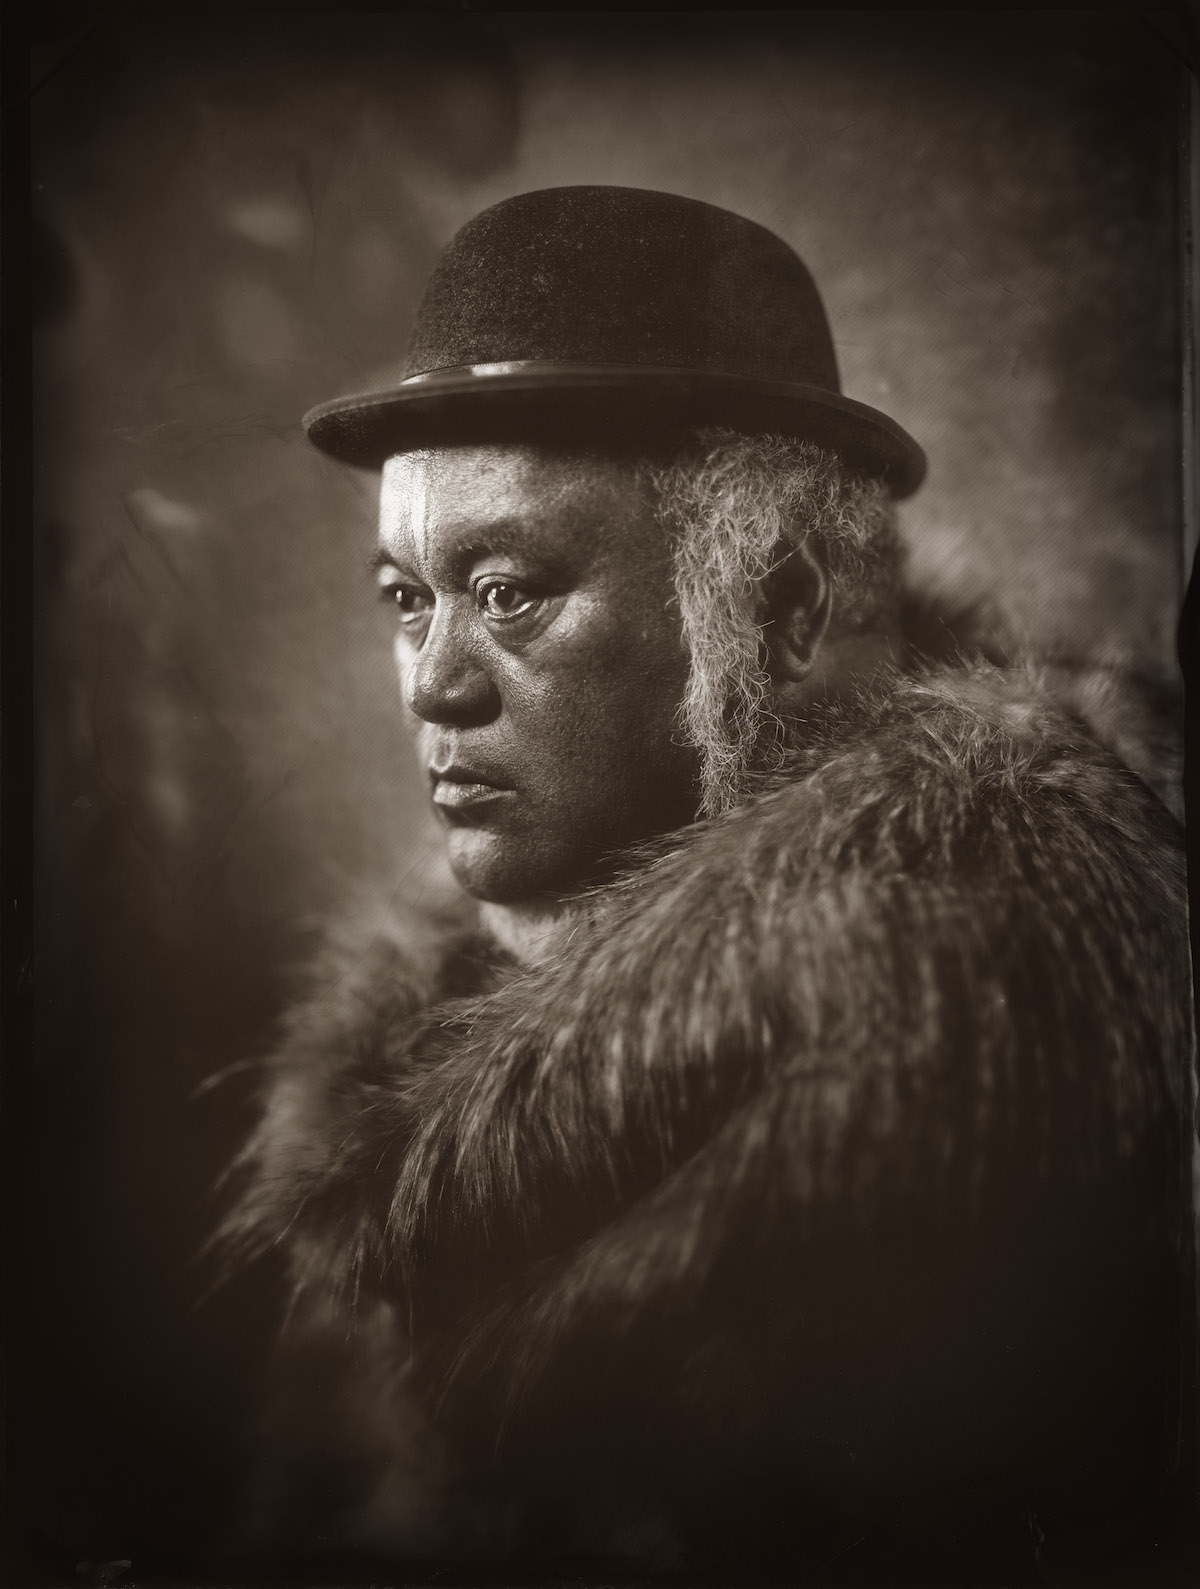 Wet collodion photography by Michael Bradley